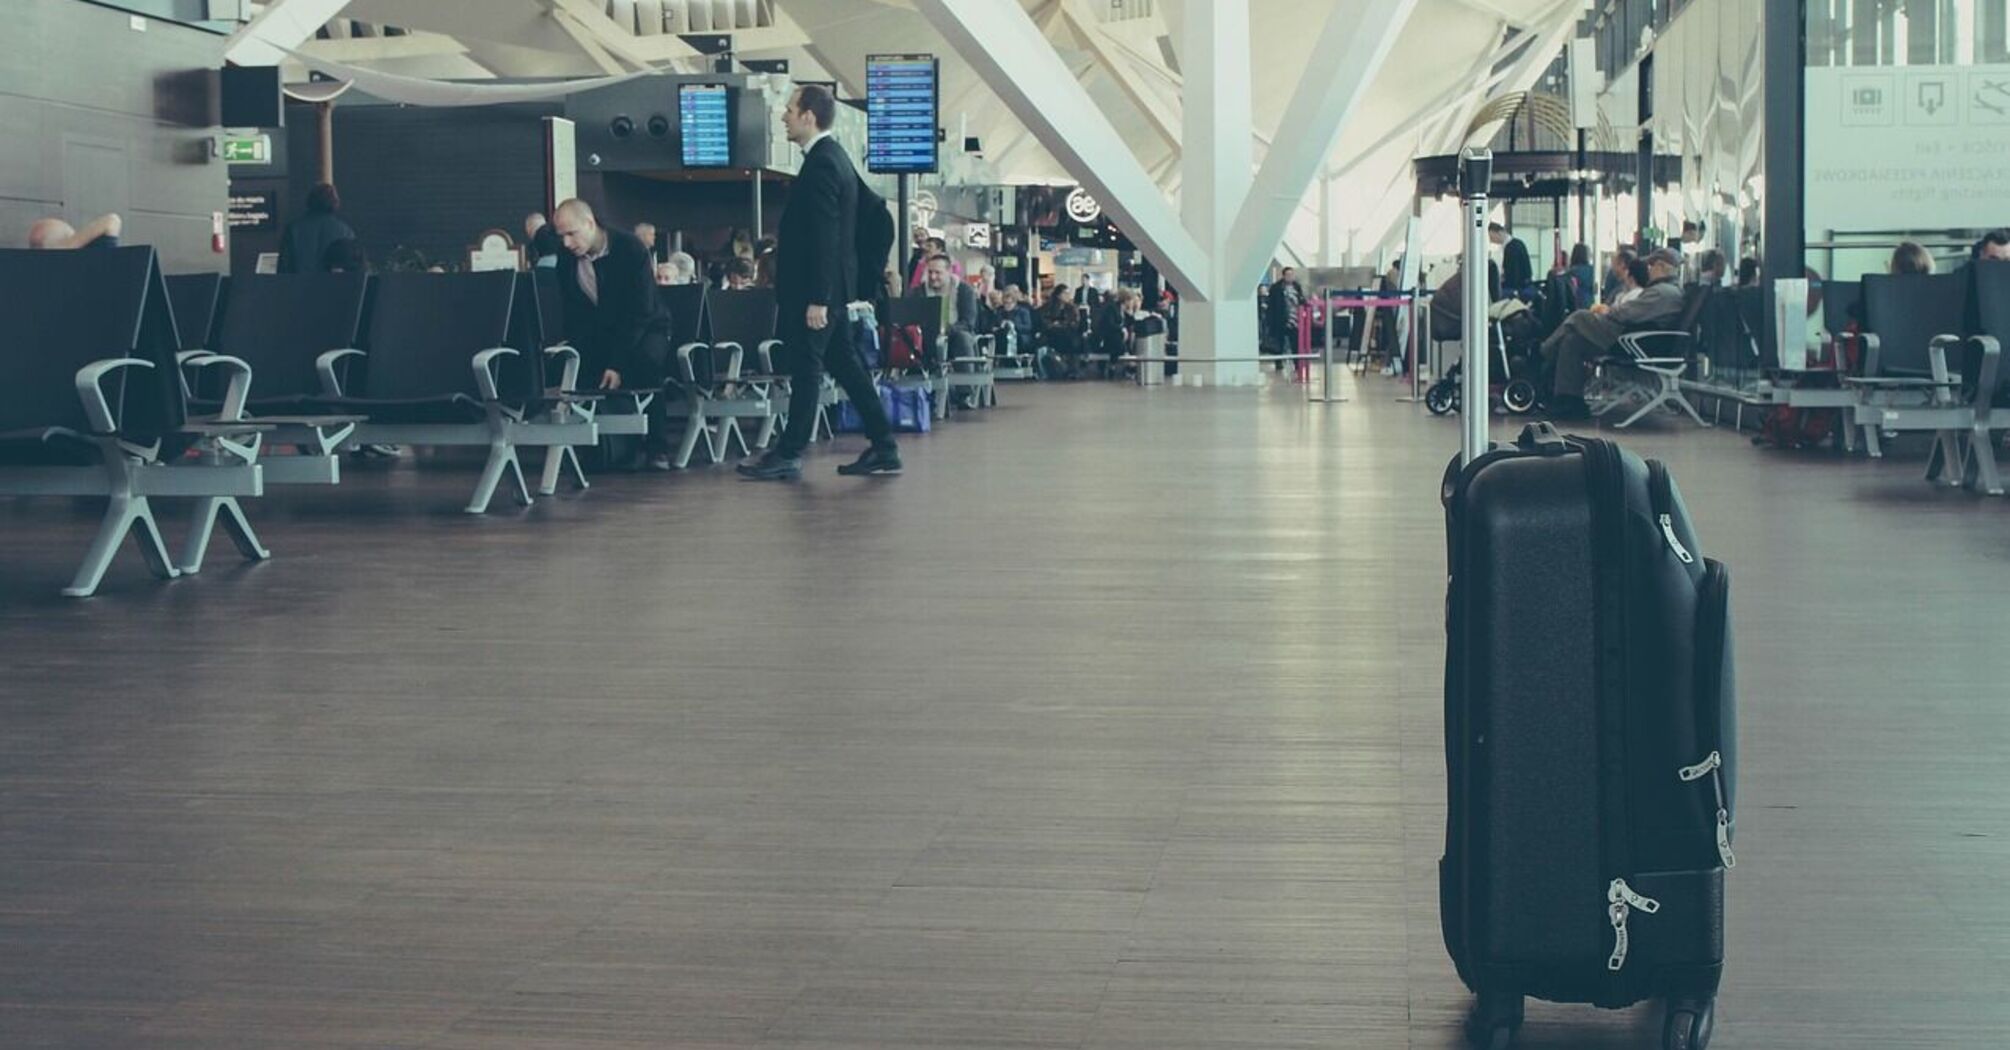 Losing luggage: What to do if the airline lost your suitcase